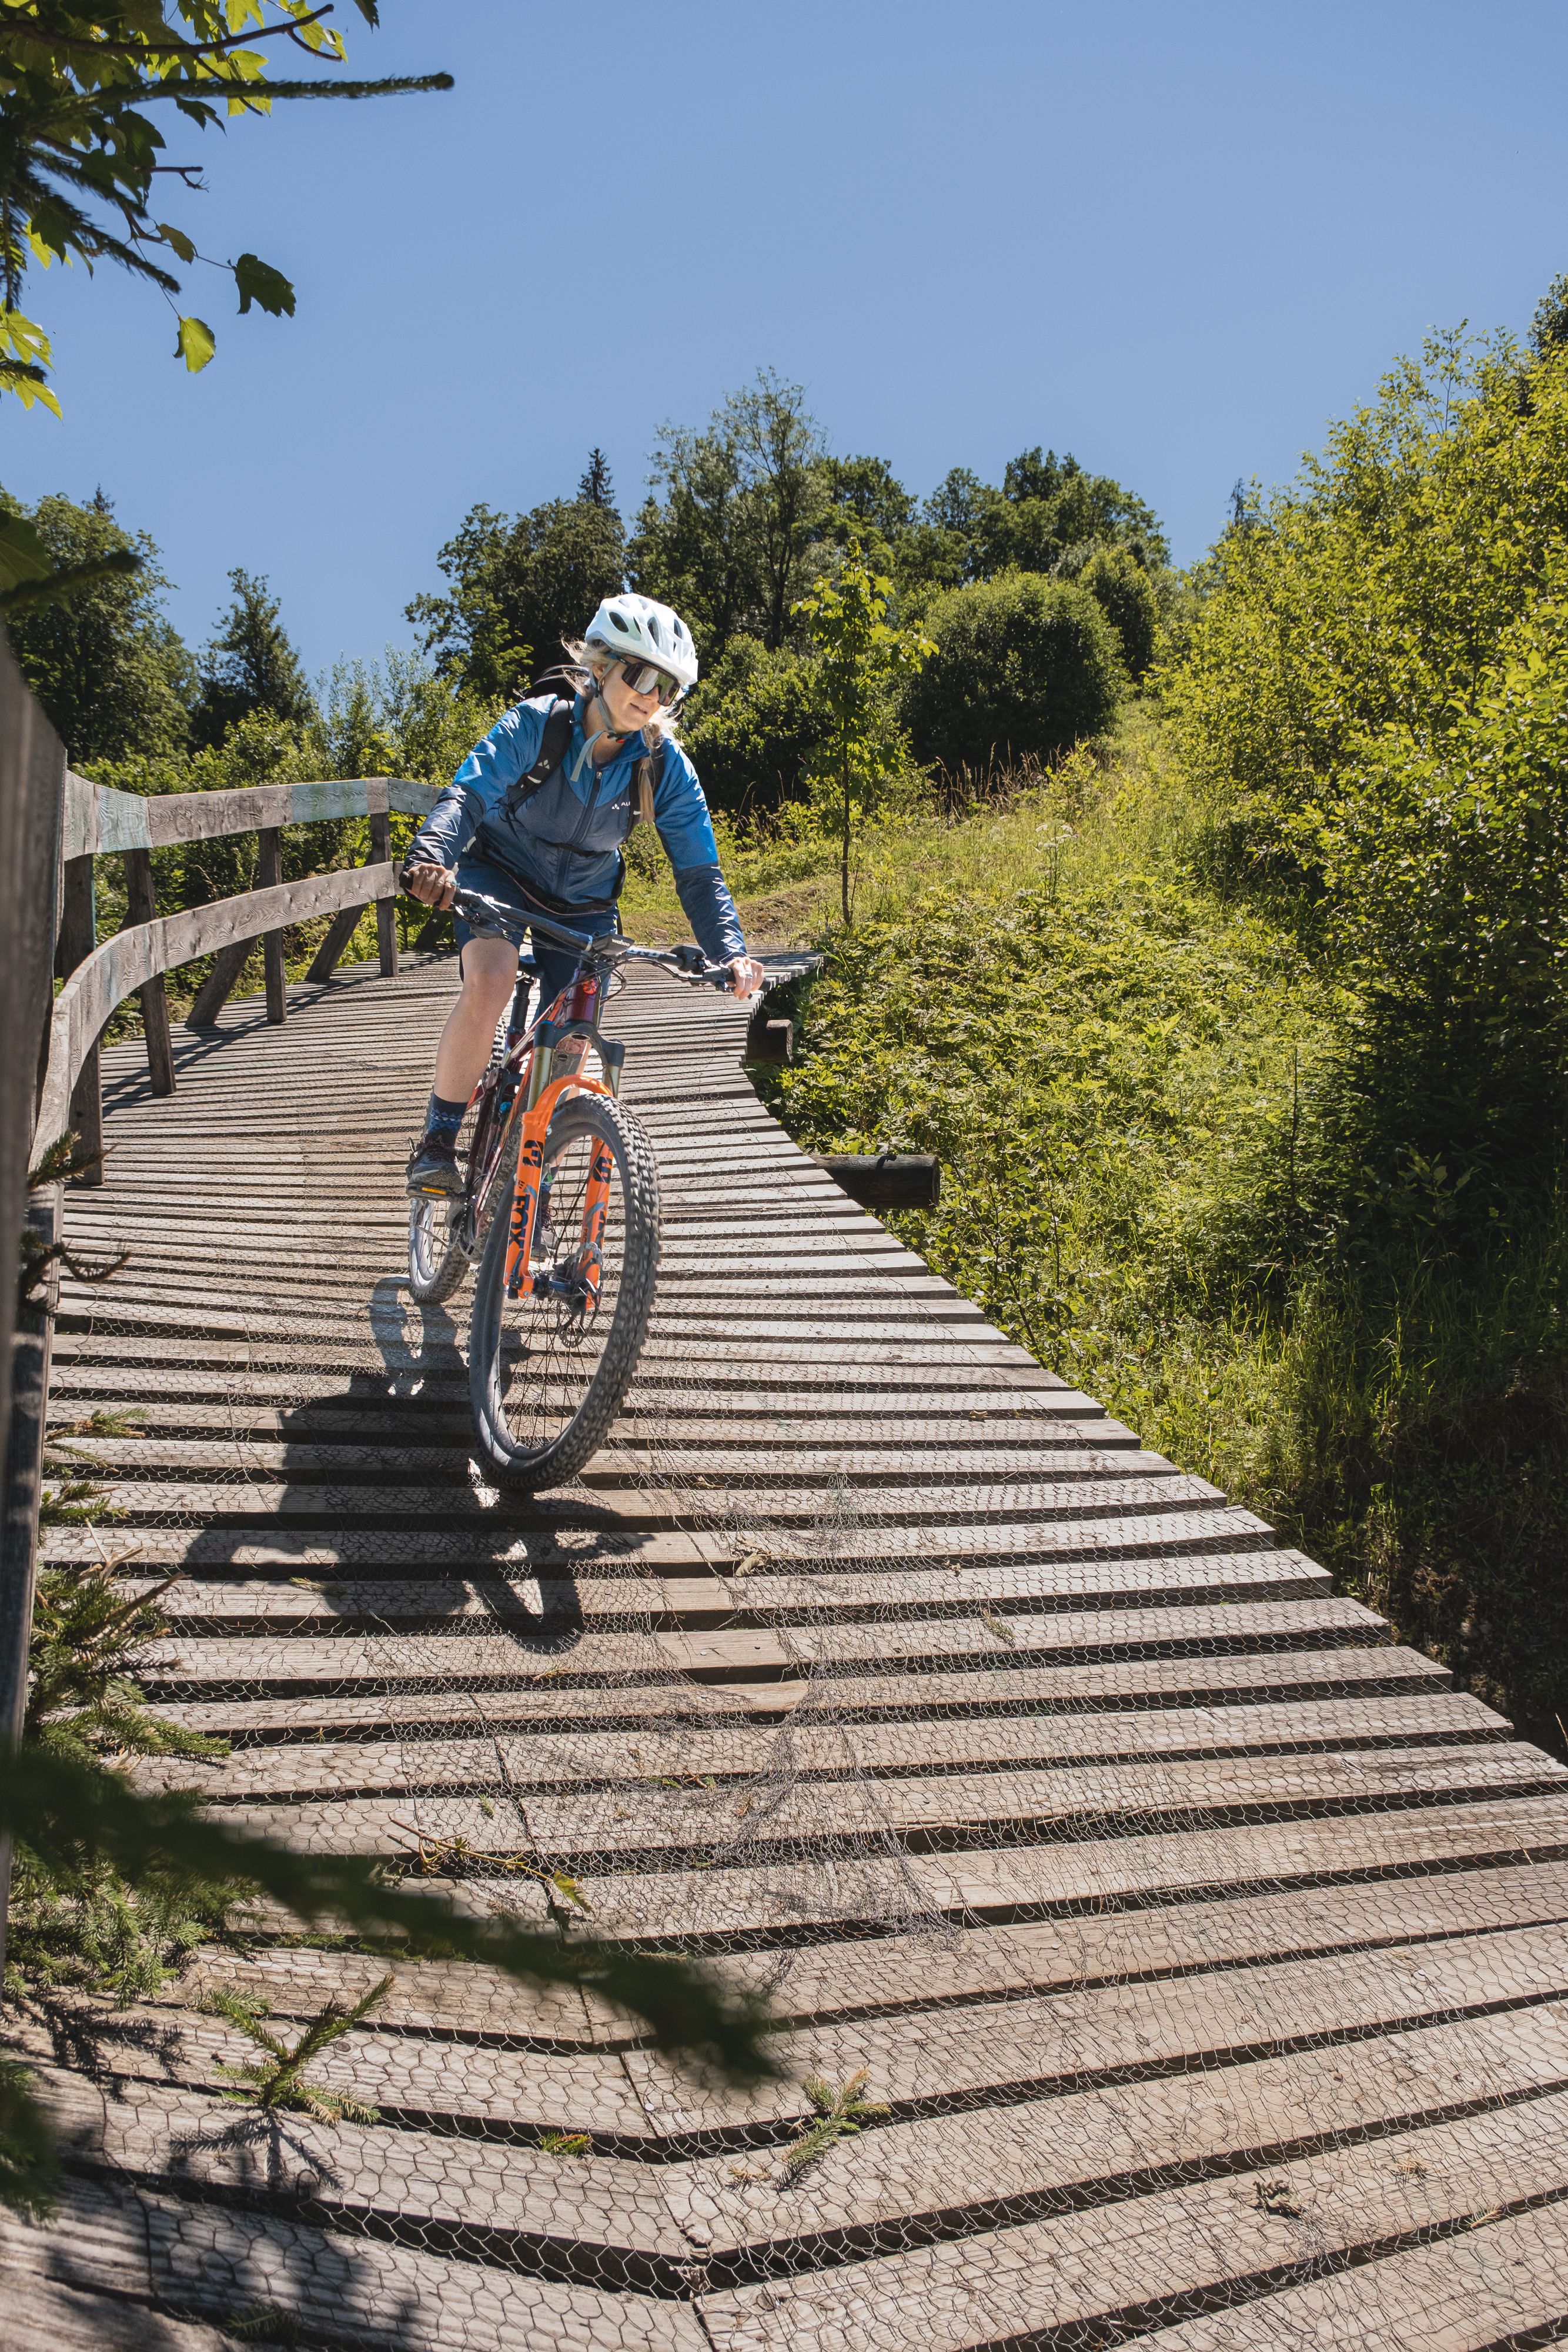 Some bridges and northshore elements are making the Harschbich Trail in the Kitzalps region a fun challenge for mountainbikers!